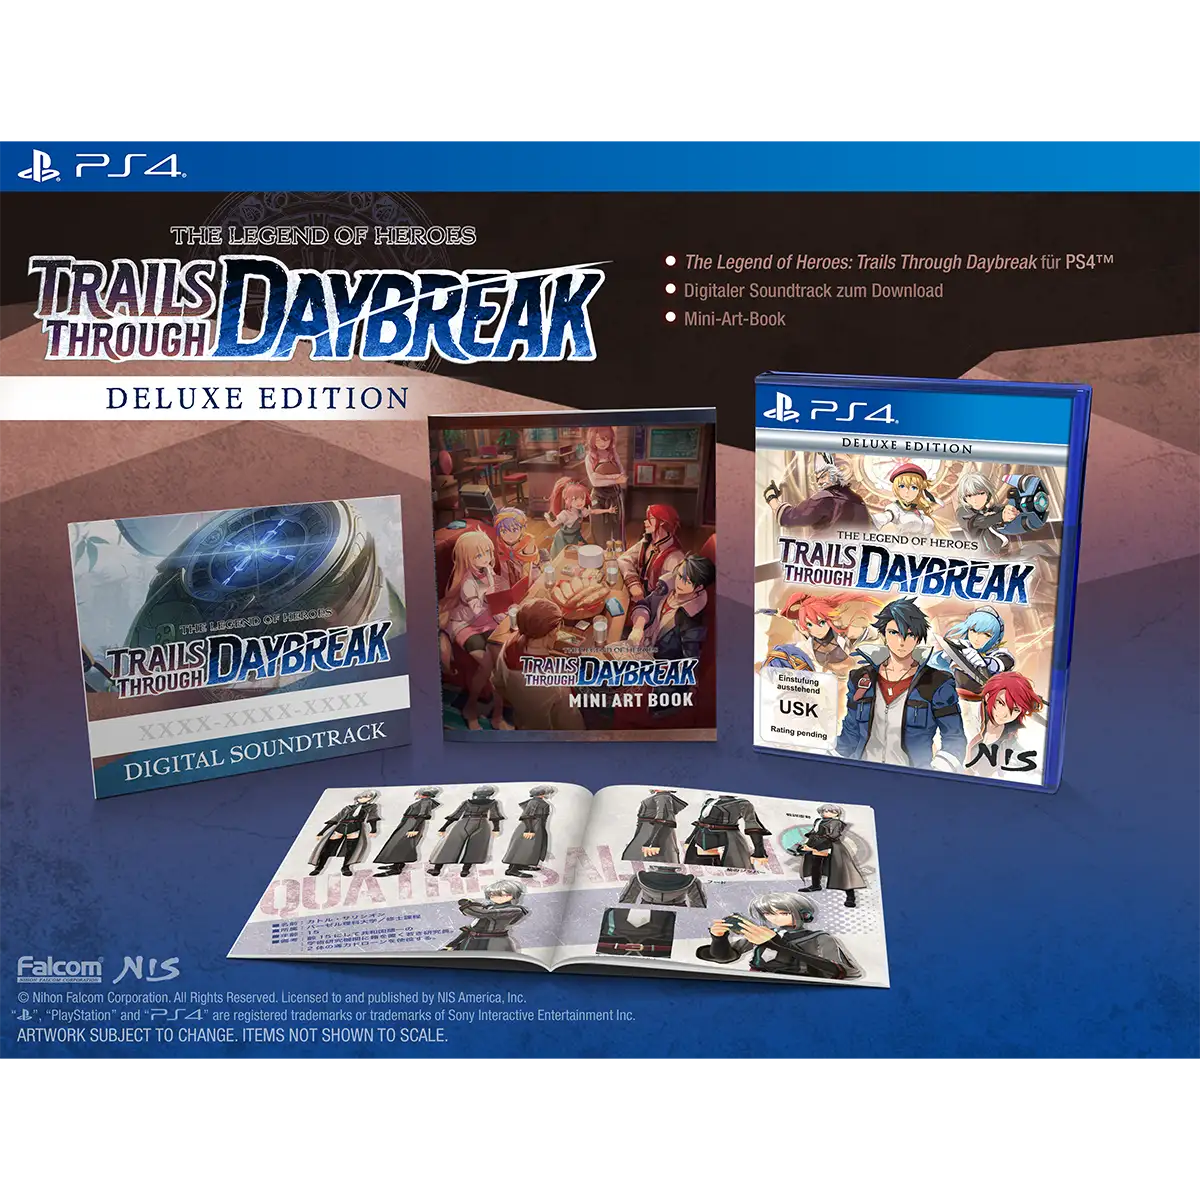 The Legend of Heroes: Trails through Daybreak - Deluxe Edition (PS4) Image 2